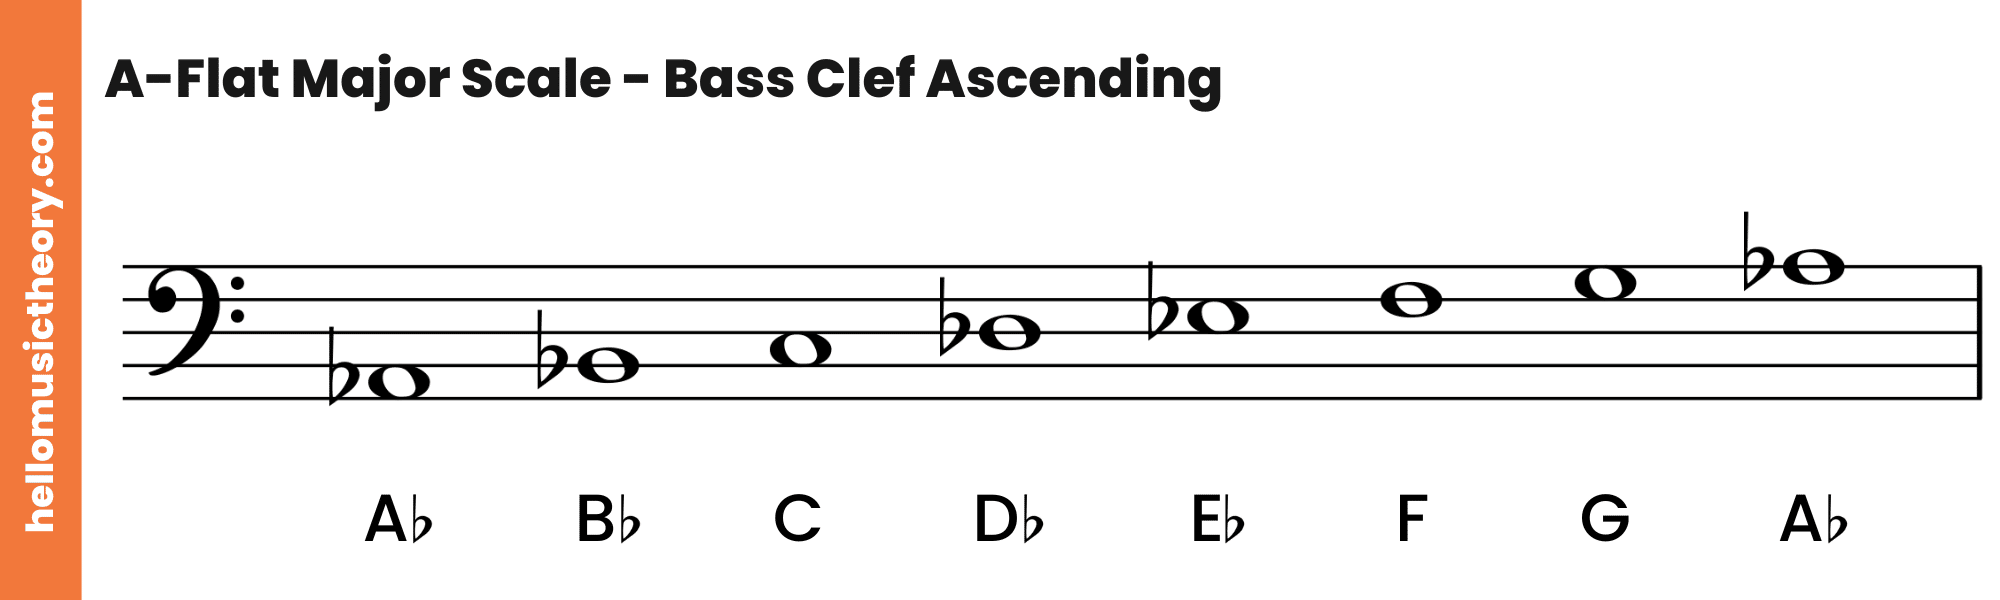 A-Flat Major Scale Bass Clef Ascending